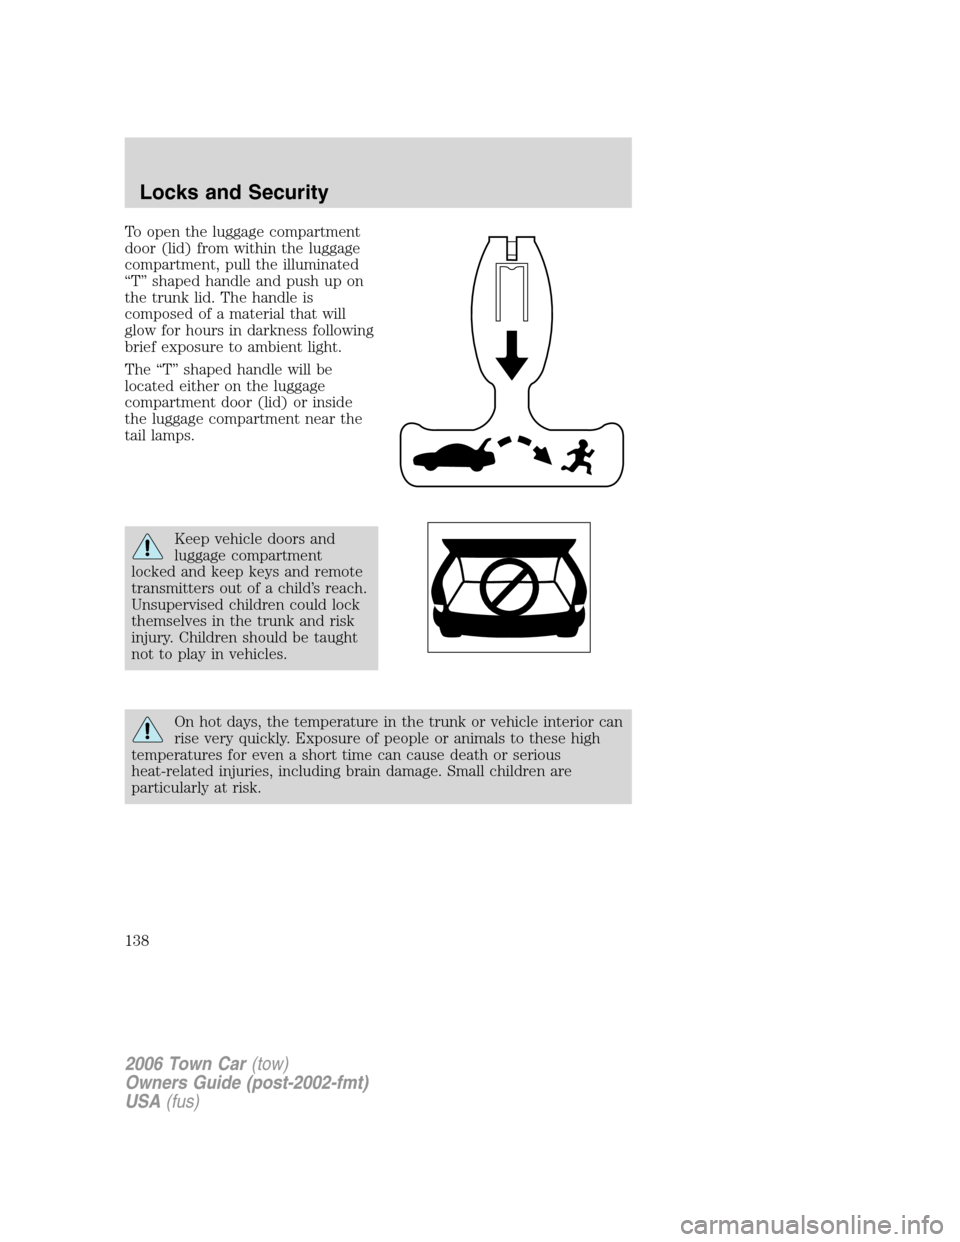 LINCOLN TOWN CAR 2006  Owners Manual To open the luggage compartment
door (lid) from within the luggage
compartment, pull the illuminated
“T” shaped handle and push up on
the trunk lid. The handle is
composed of a material that will
